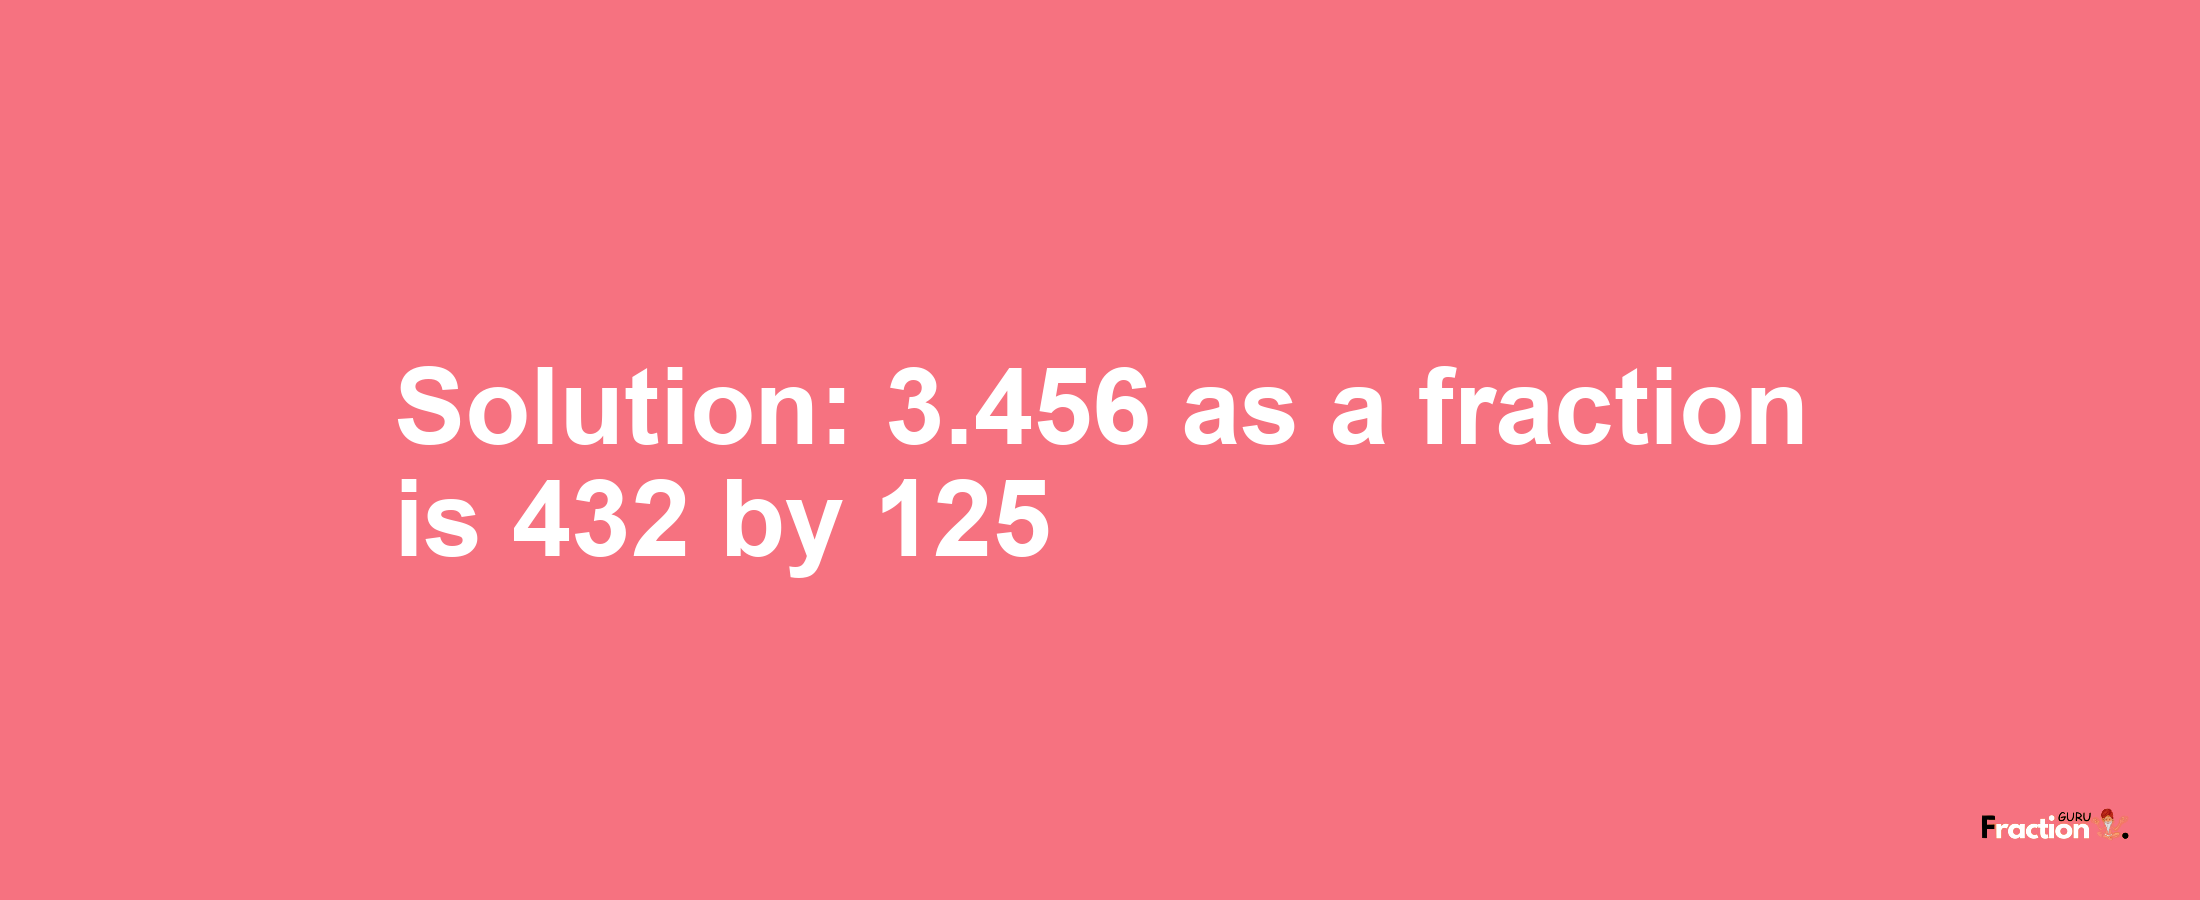 Solution:3.456 as a fraction is 432/125